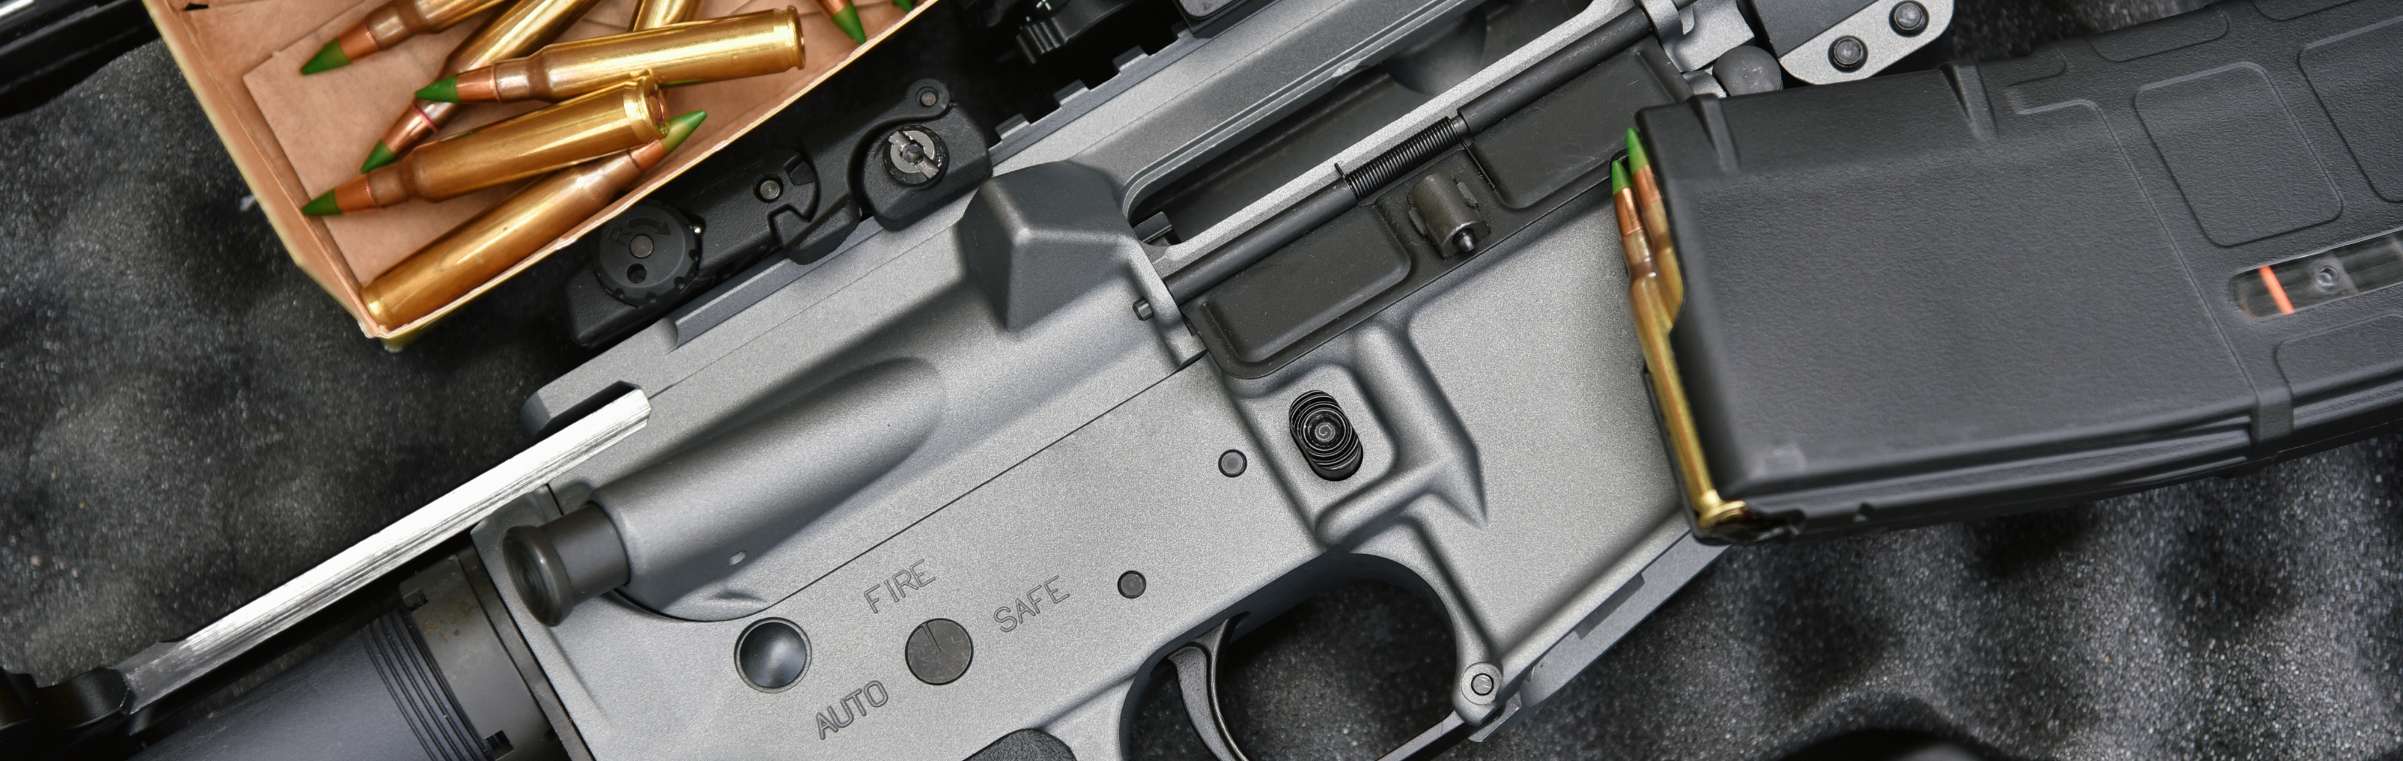 AR-15 Safety: The Best AR-15 Storage Options & Tips